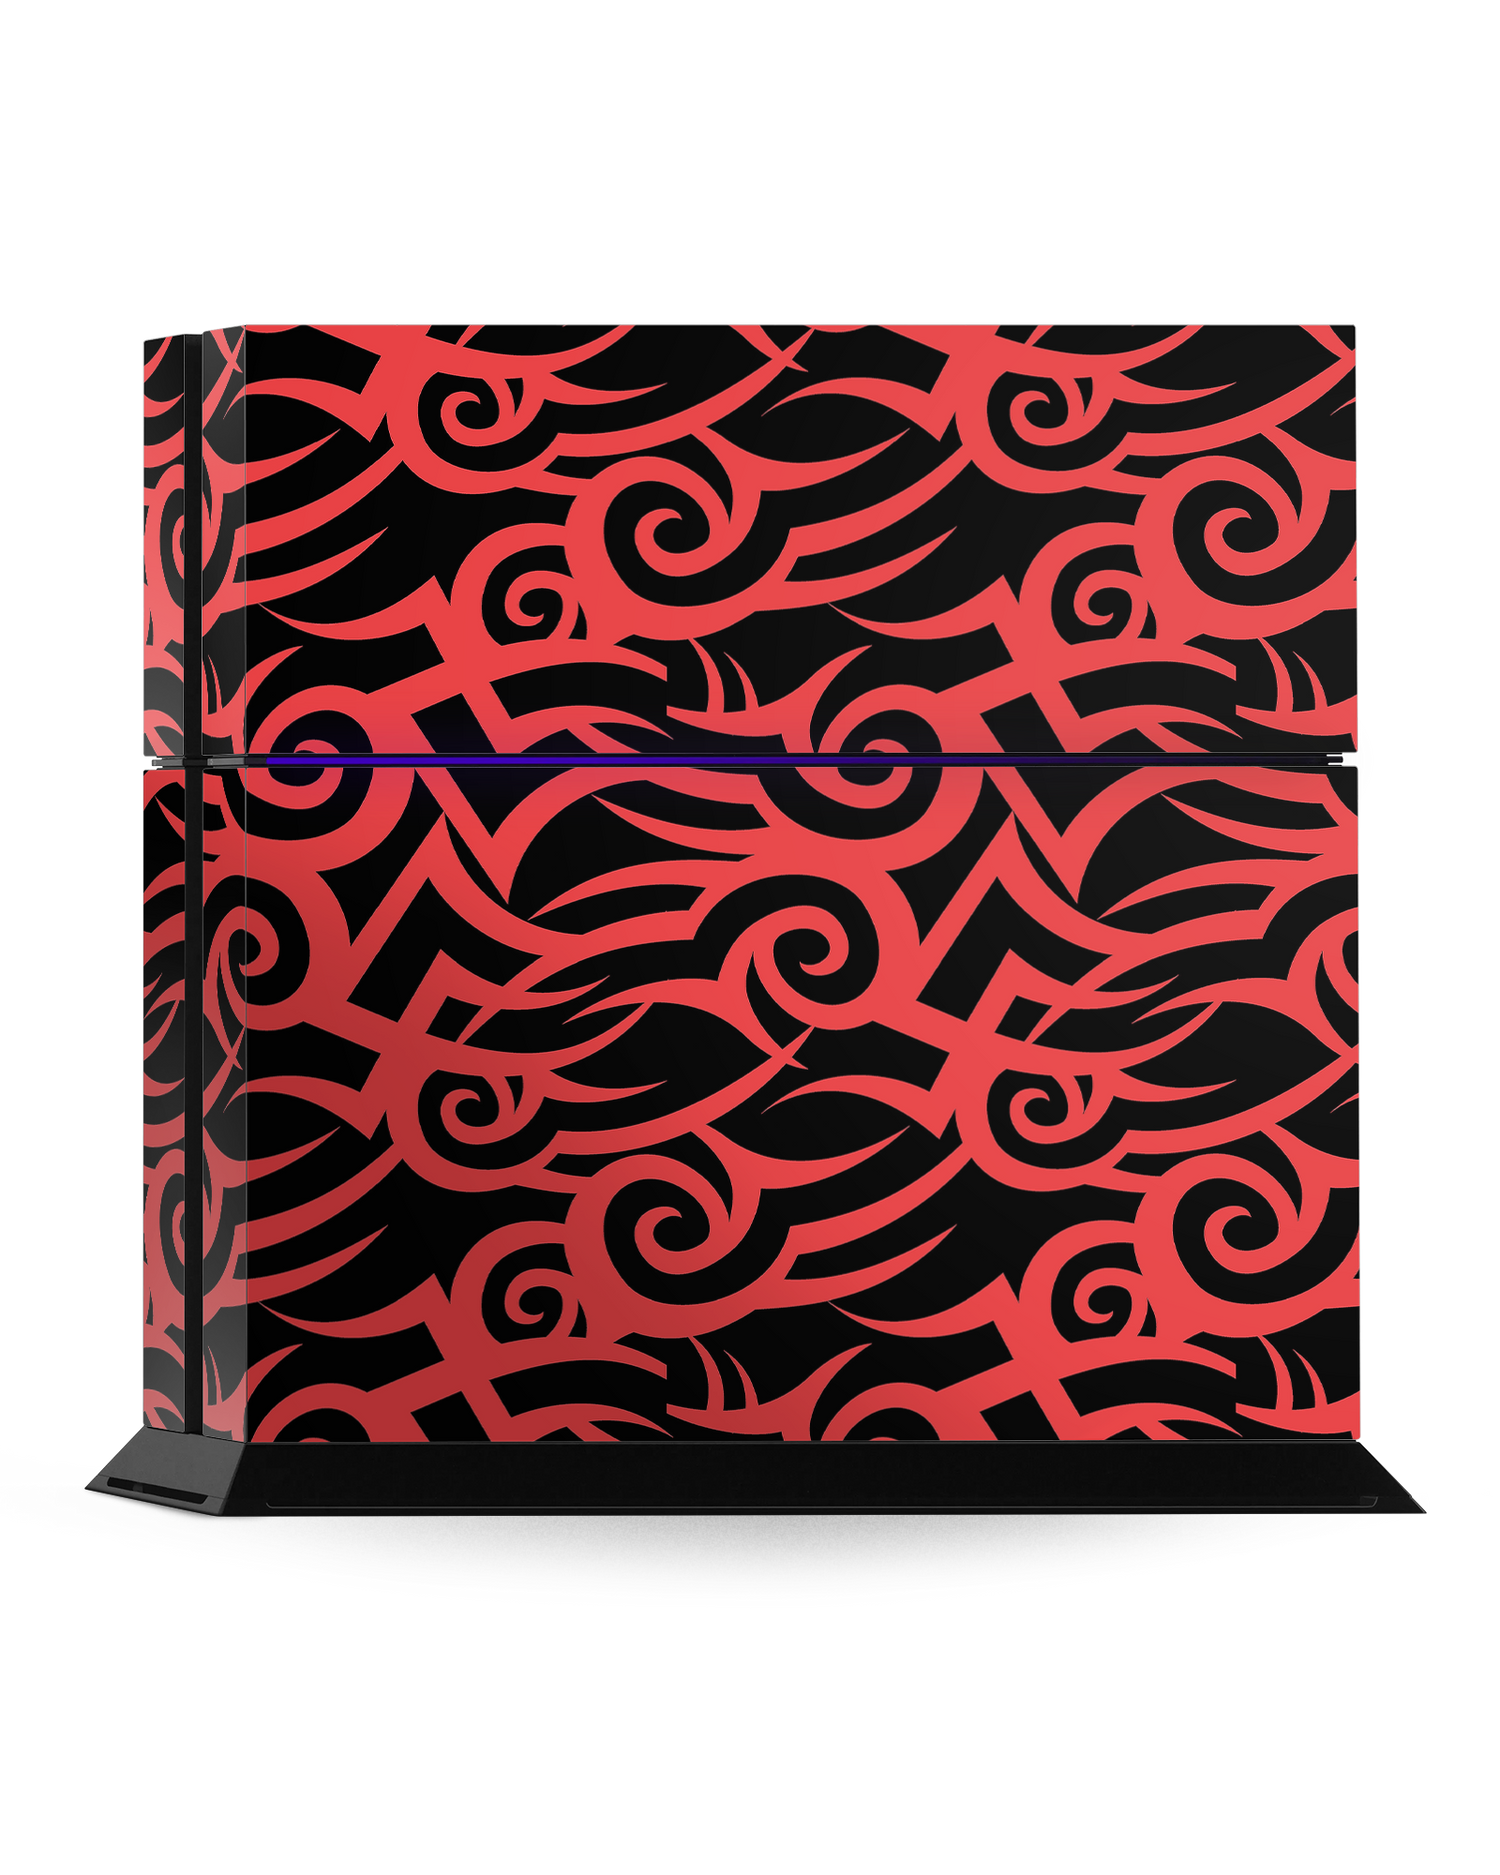 Tribal Pattern Console Skin for Sony PlayStation 4: Standing